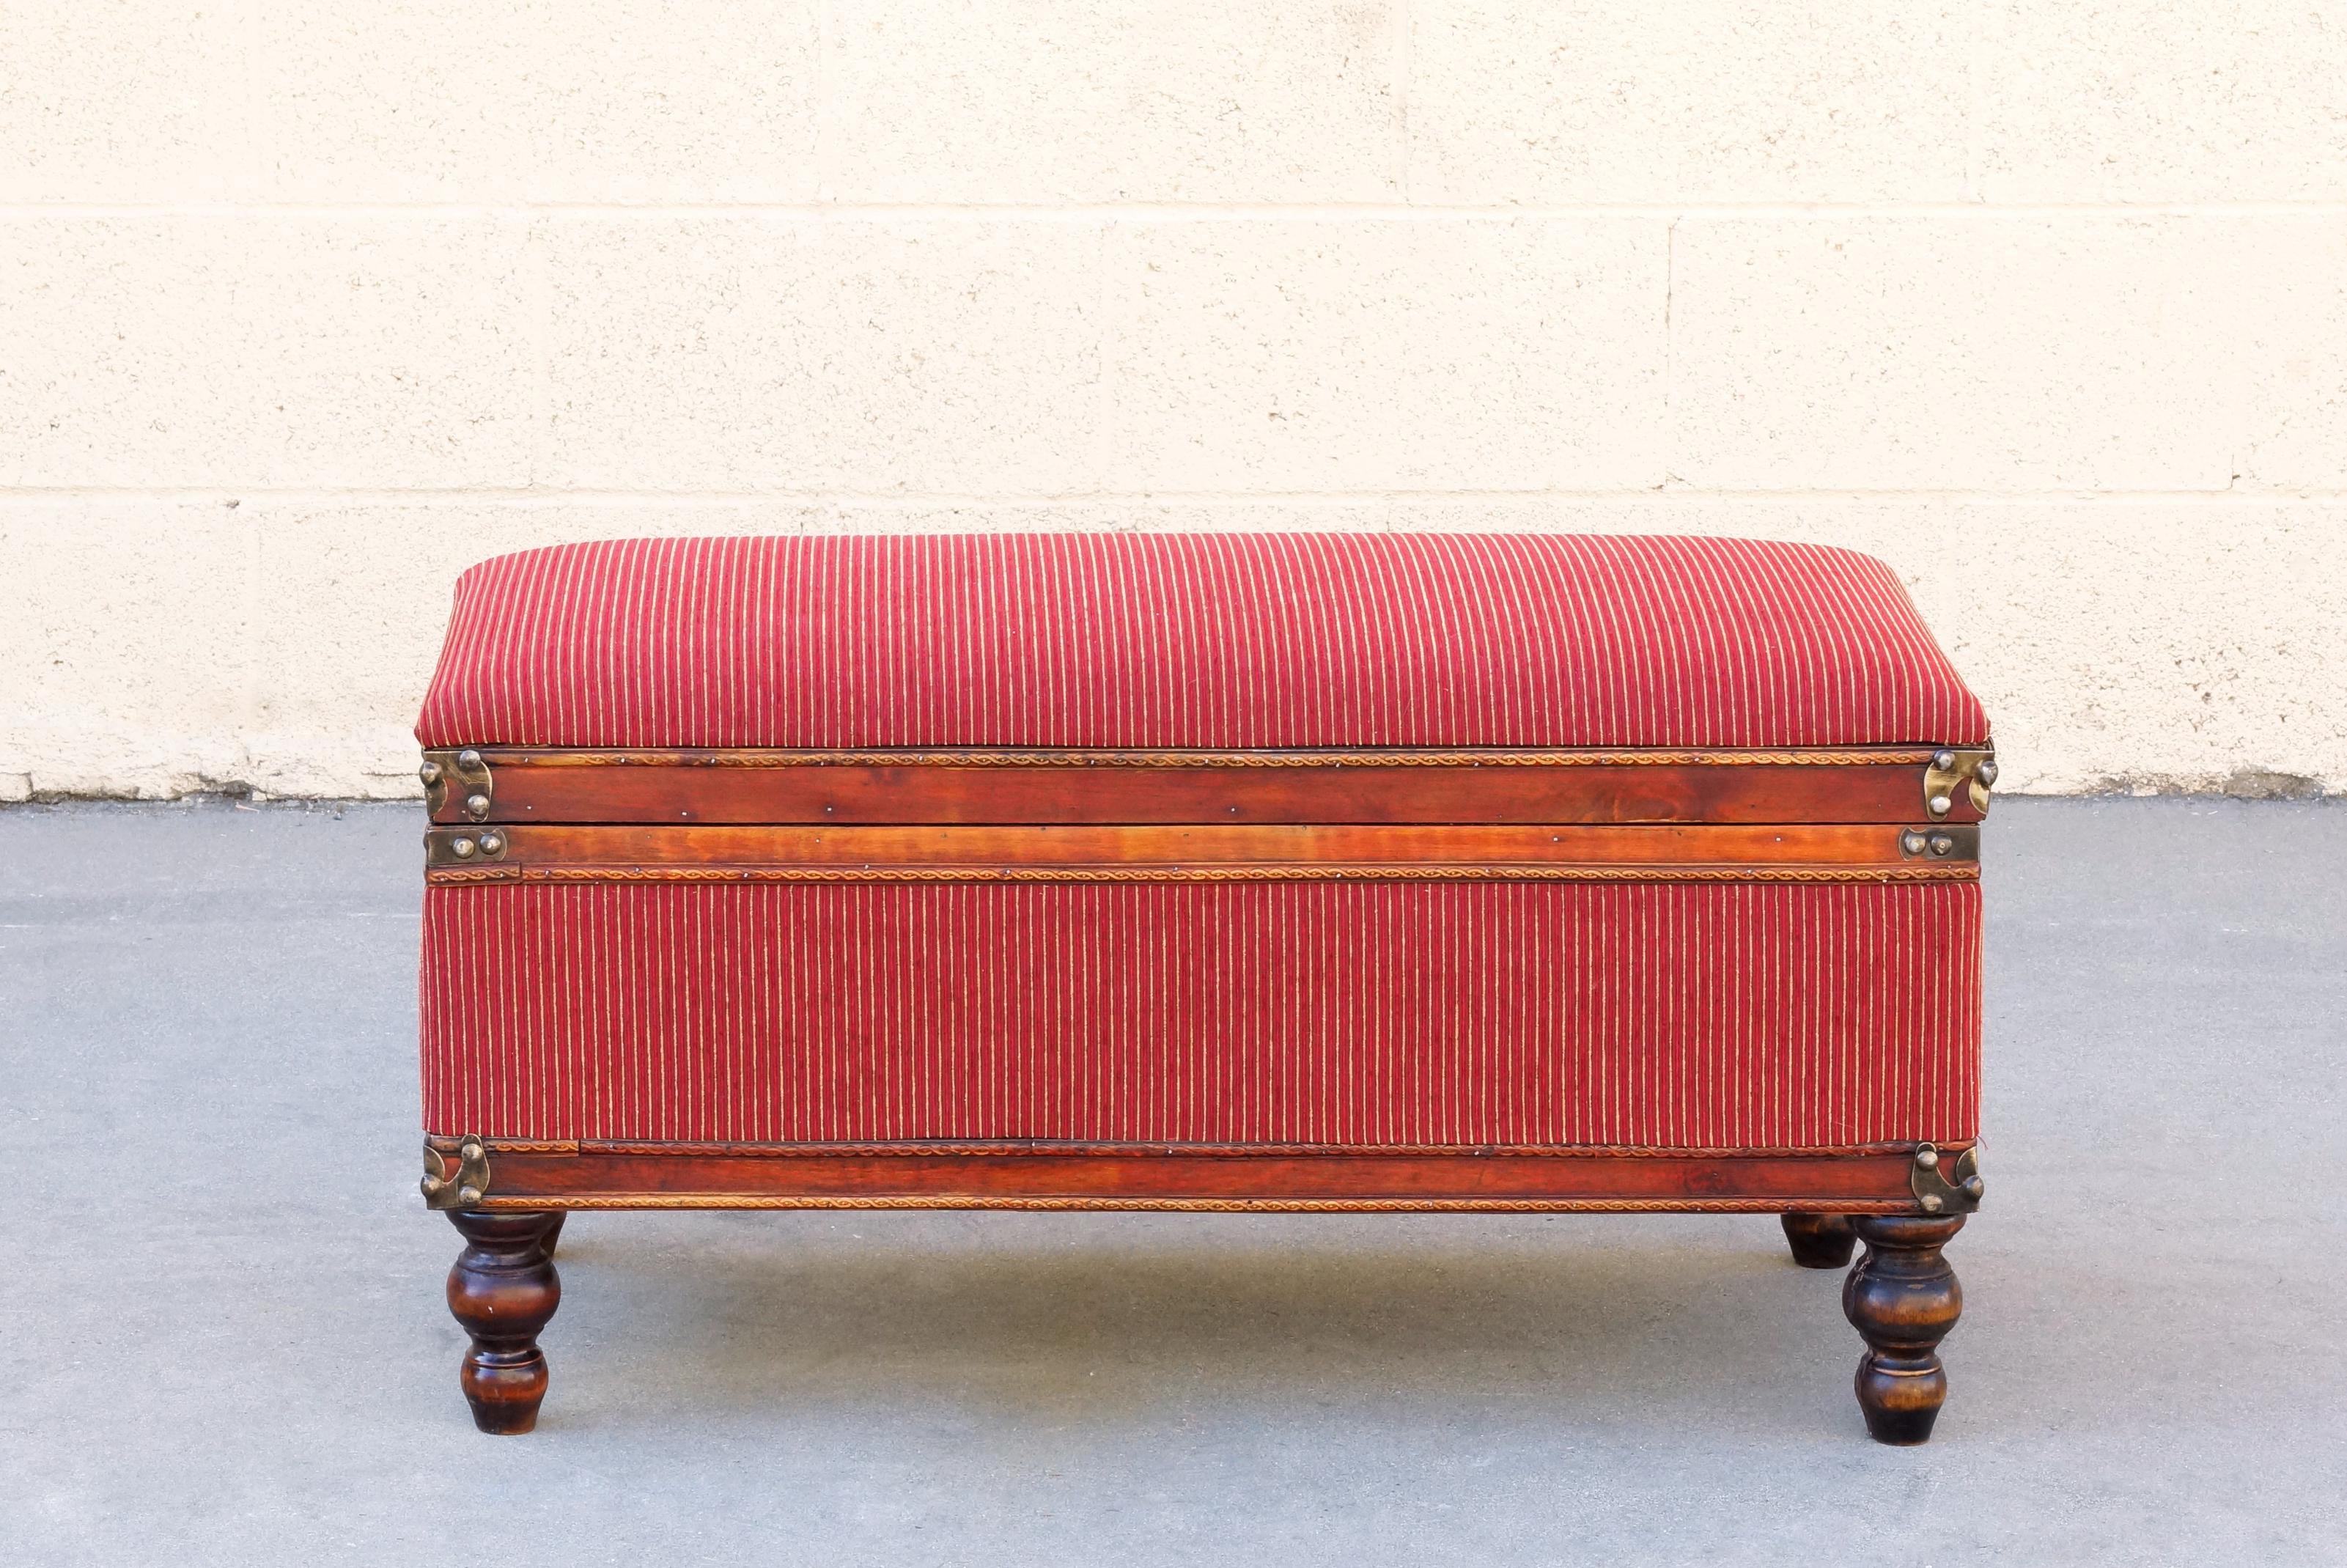 This lovely vintage blanket chest has been reupholstered in in a gold and red striped fabric. Features antique style wood legs and brass hardware. Excellent condition. Origins unknown. 

Dimensions: 17